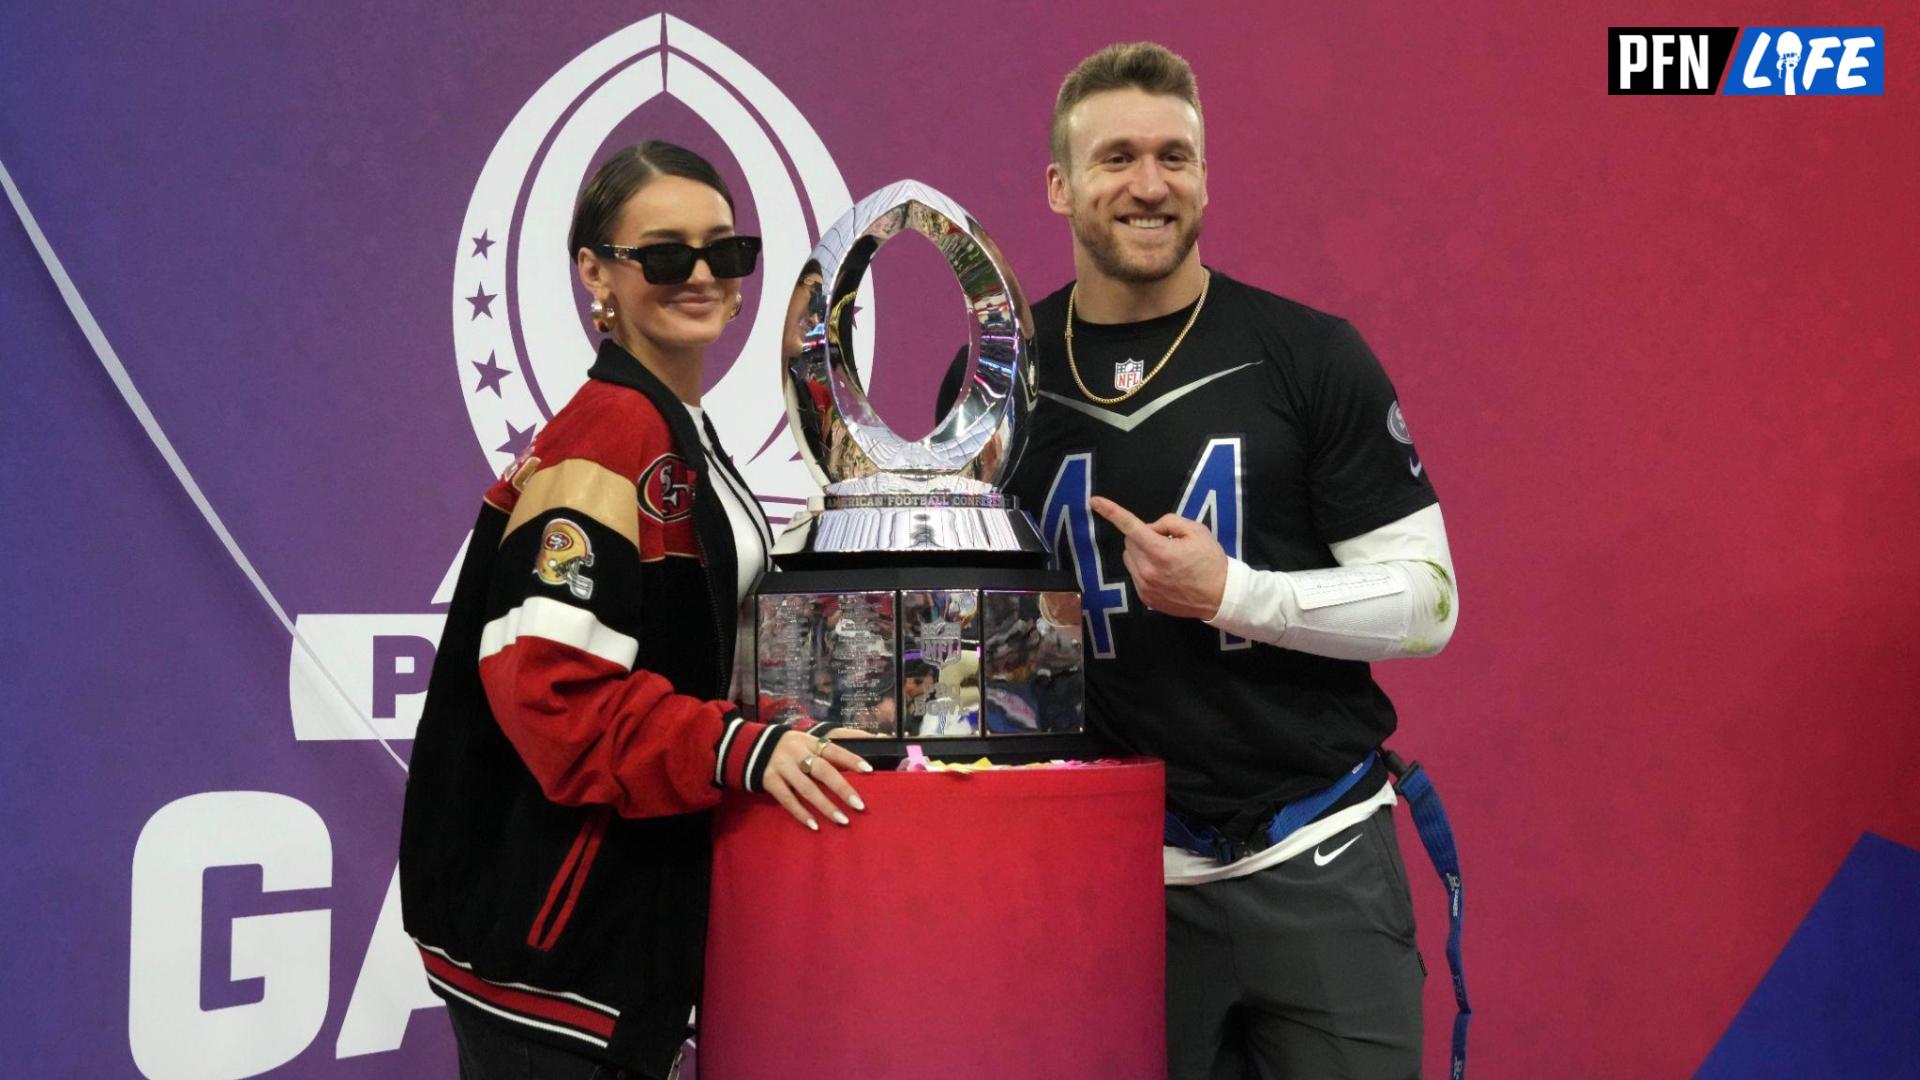 NFC fullback Kyle Juszczyk of the San Francisco 49ers (44) and wife Kristin Juszcyk pose with trophy during the Pro Bowl Games at Allegiant Stadium.